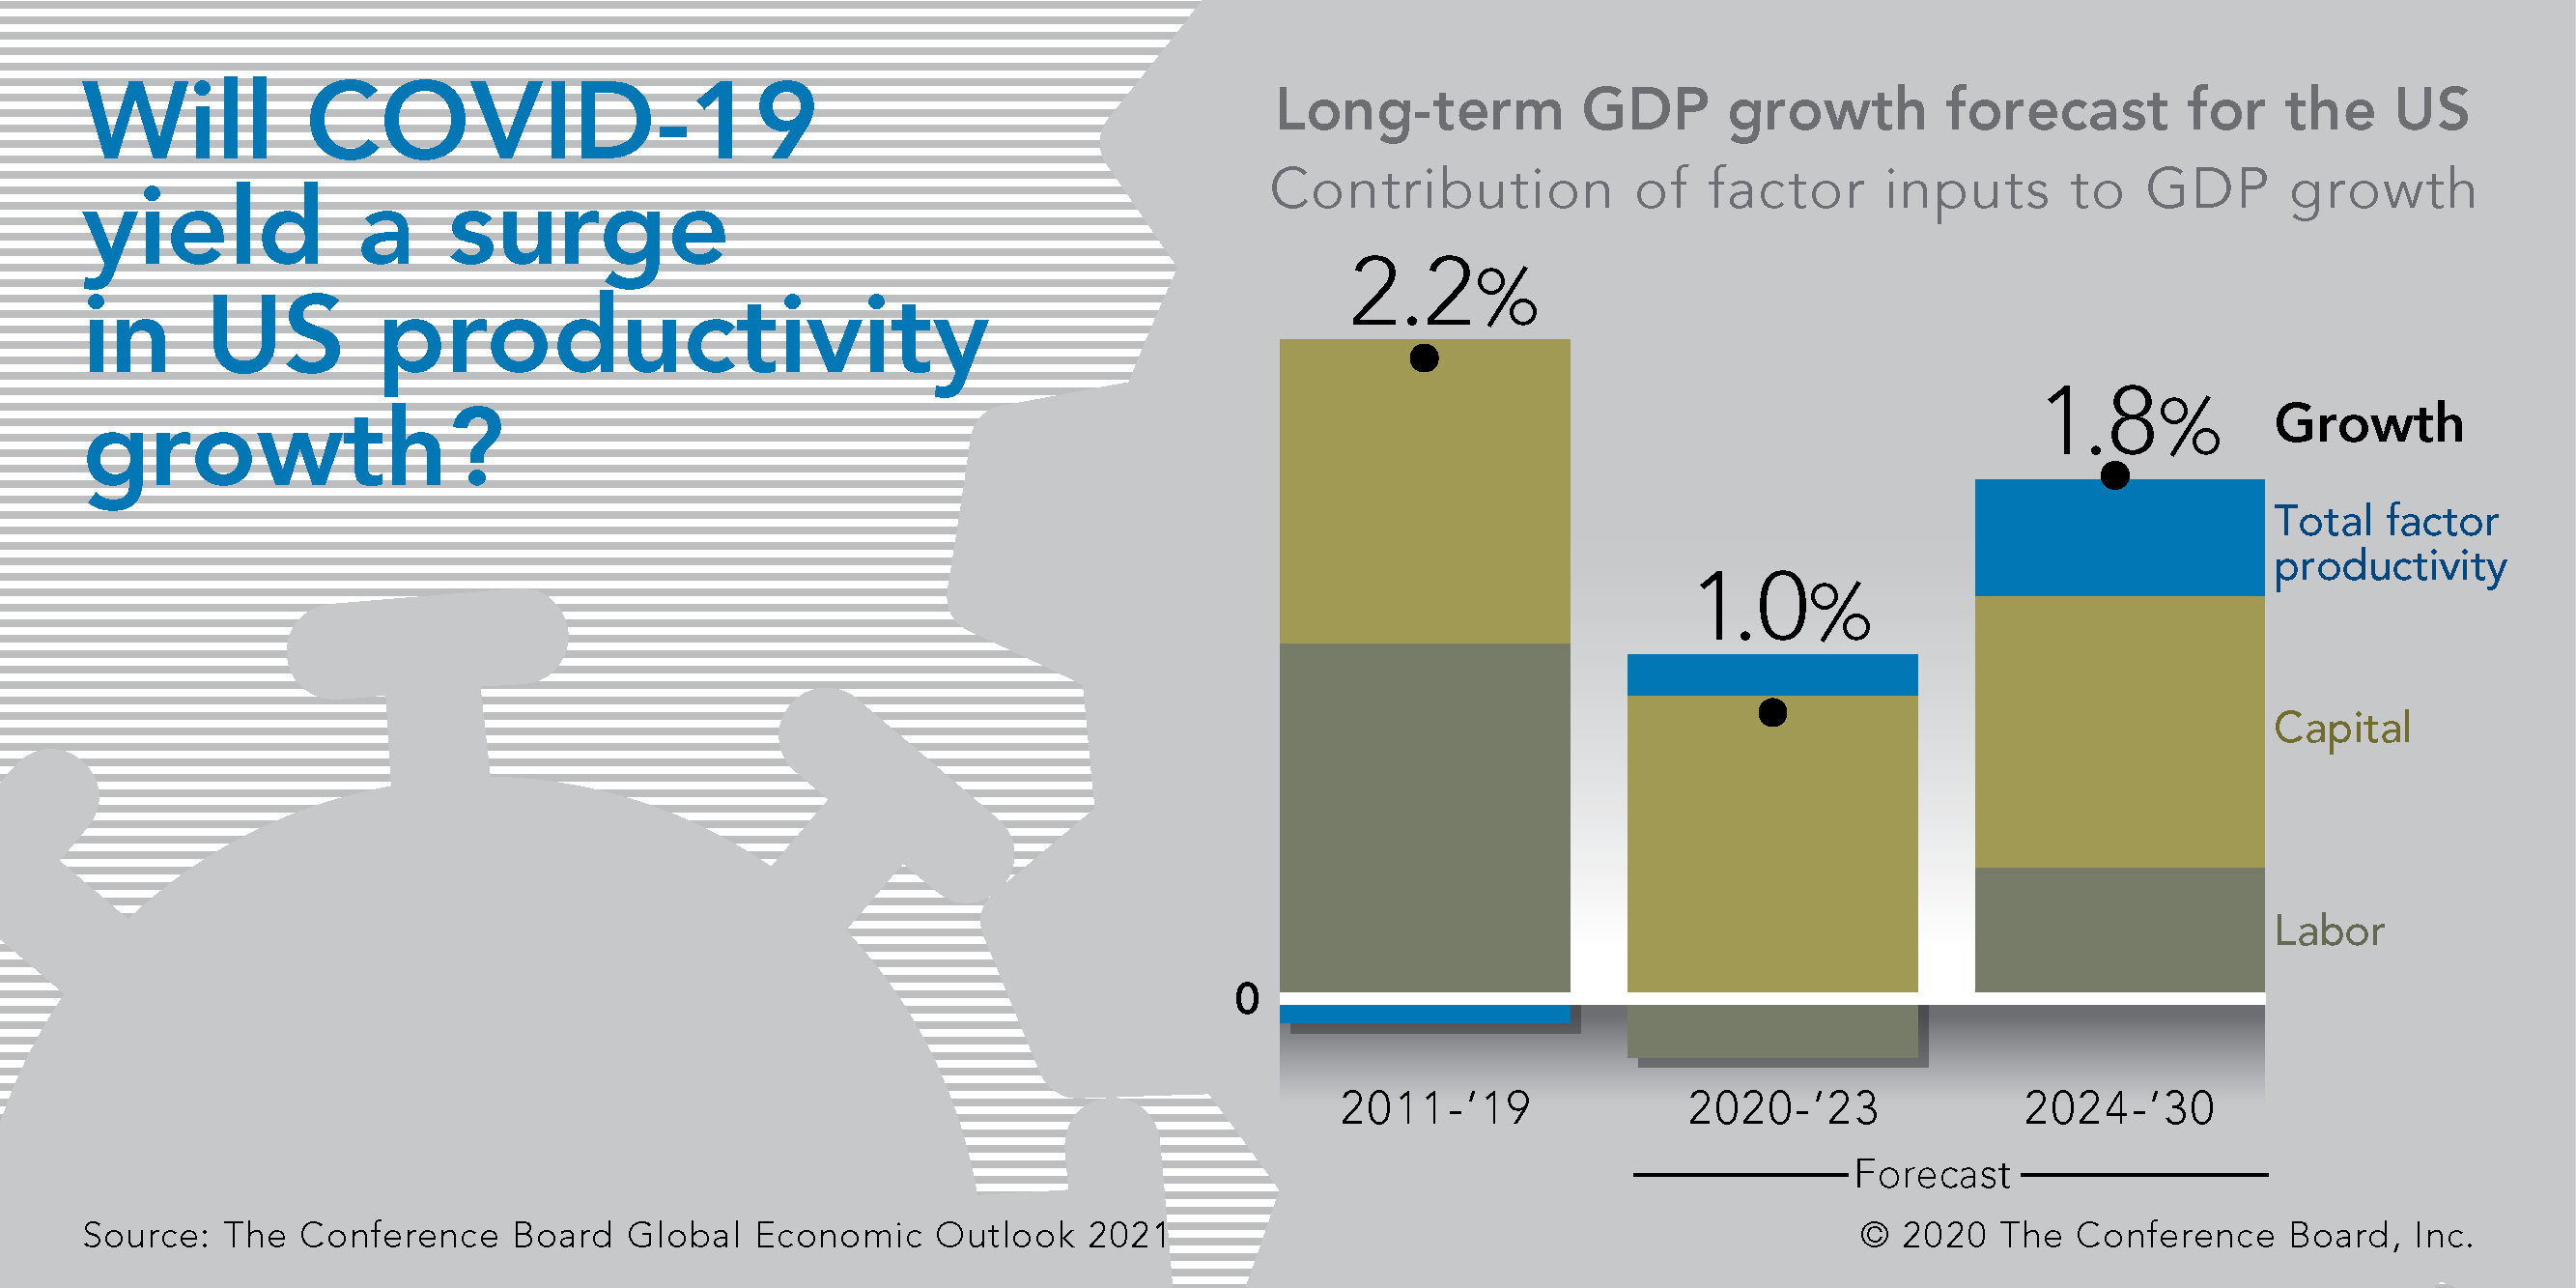 Will COVID-19 yield a surge in US productivity growth?